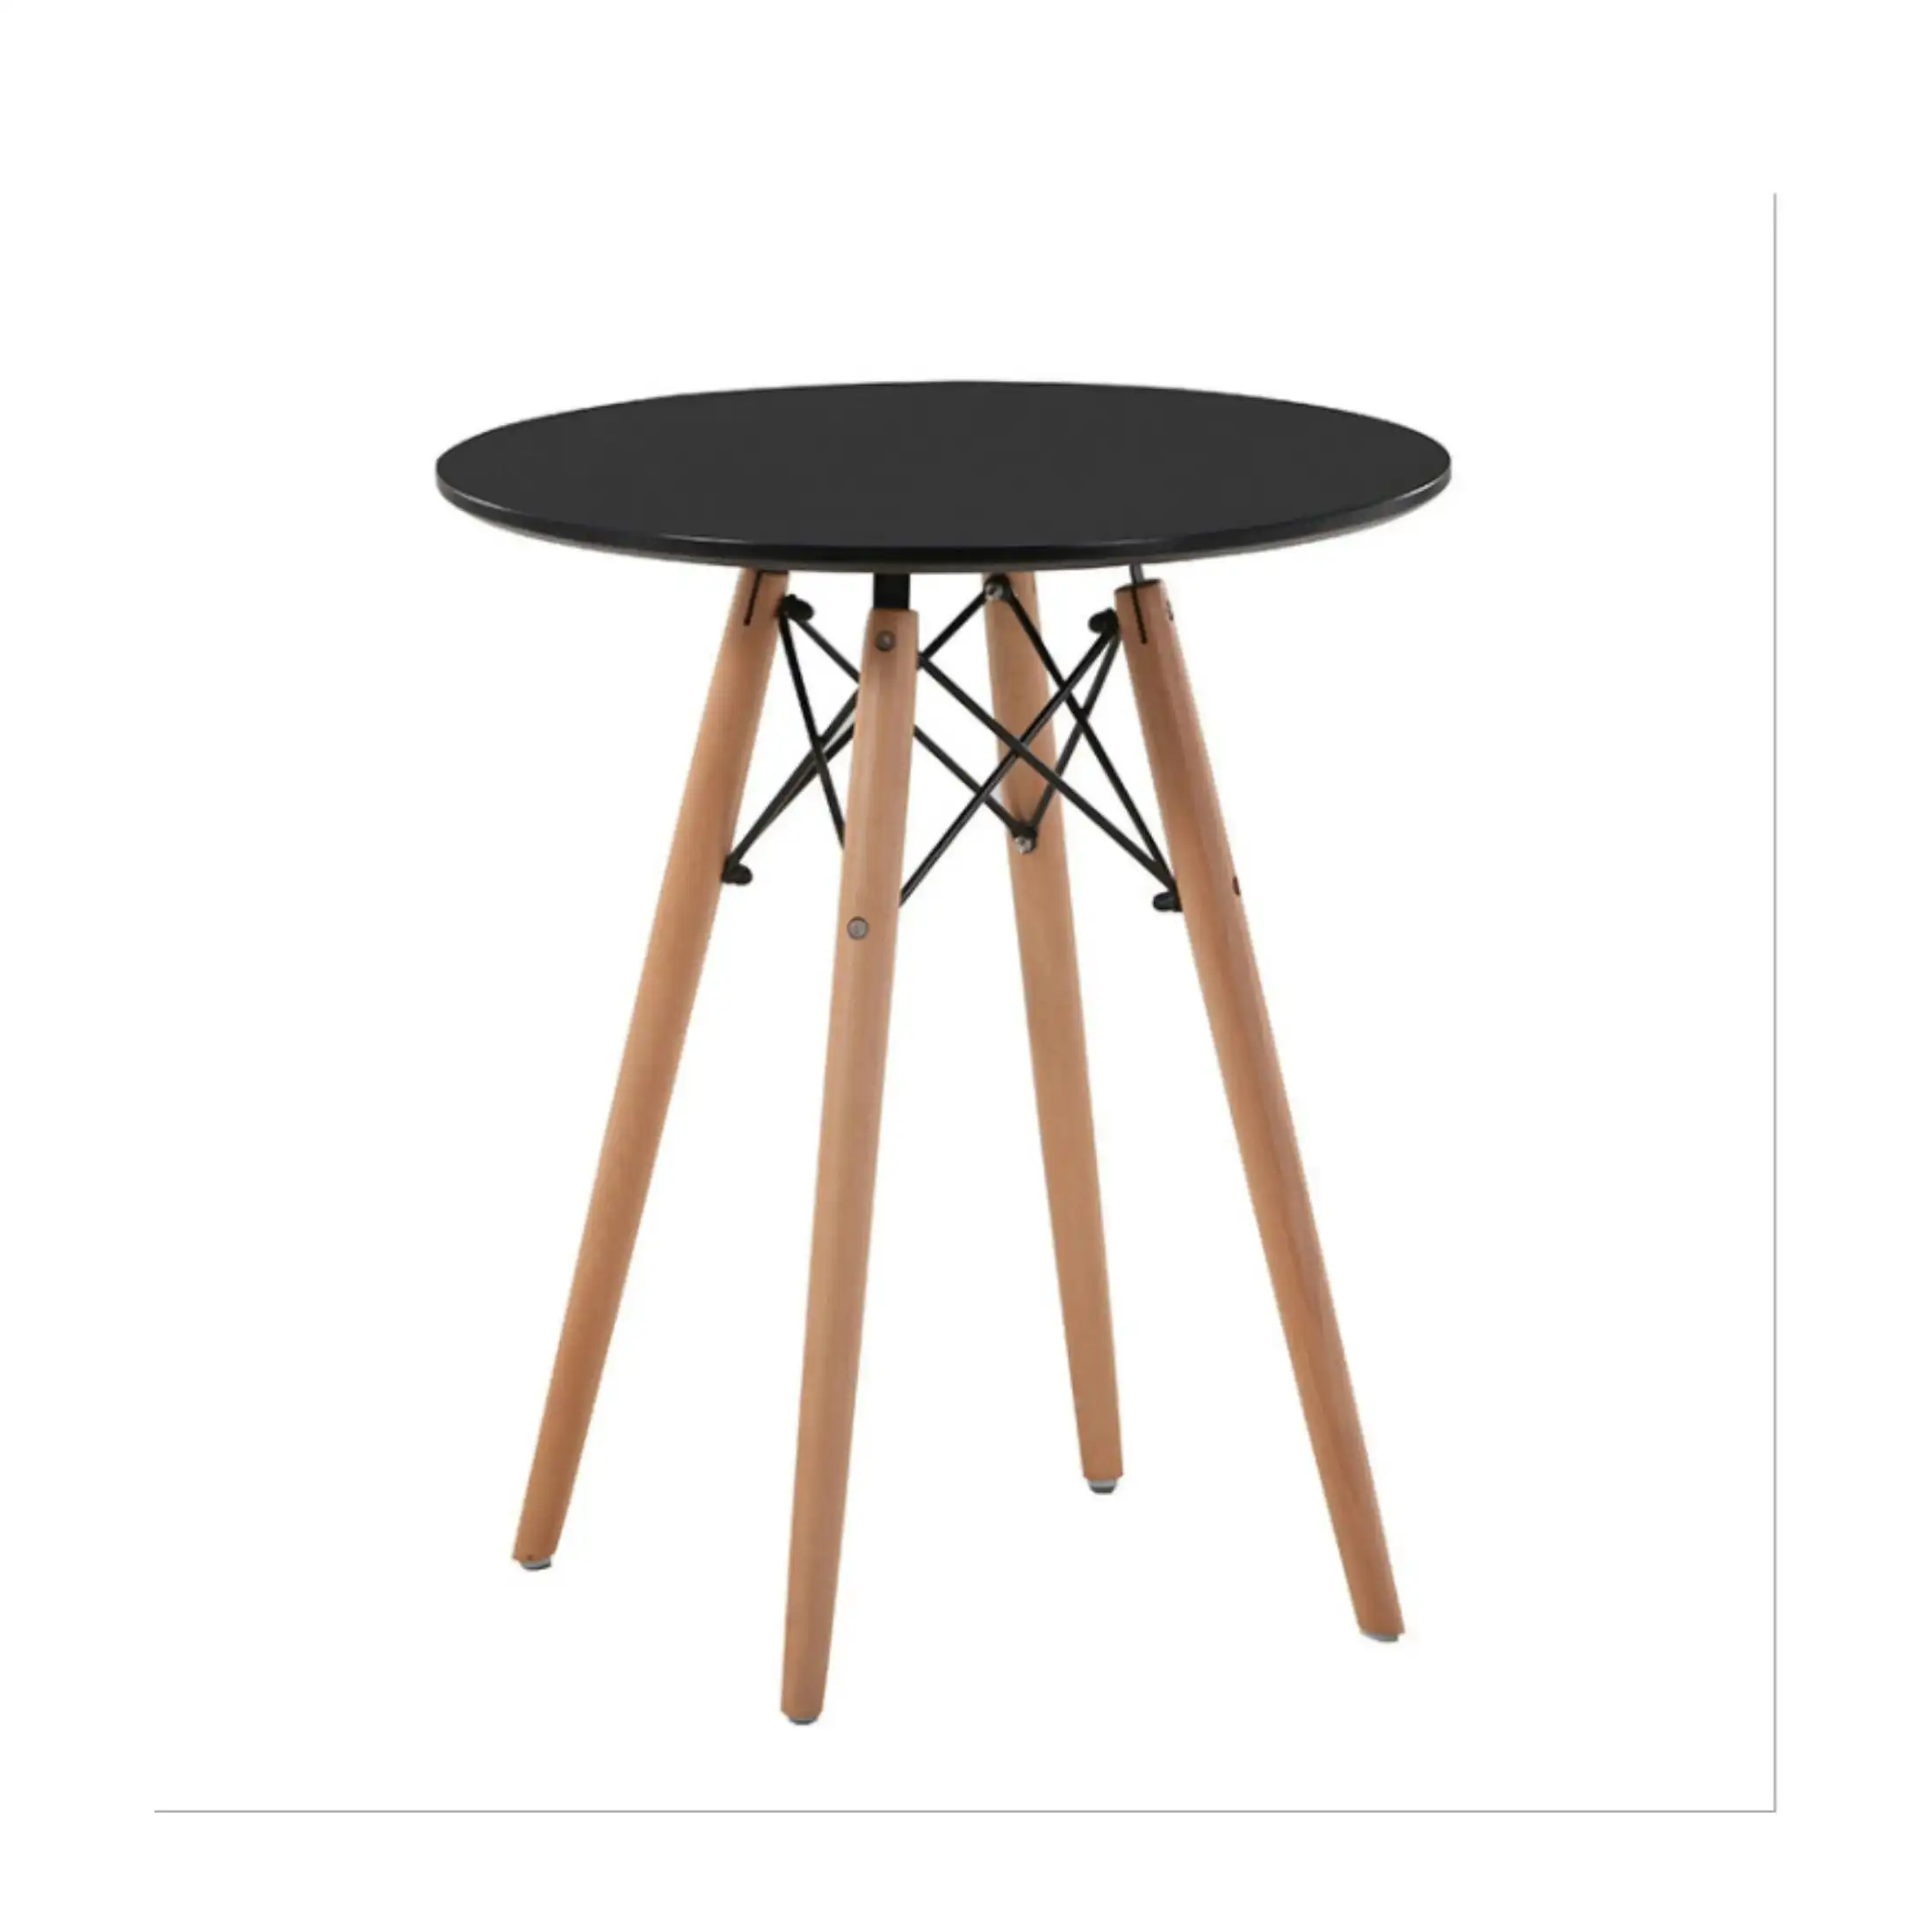 Oliver 80 cm Round Dining Table Black